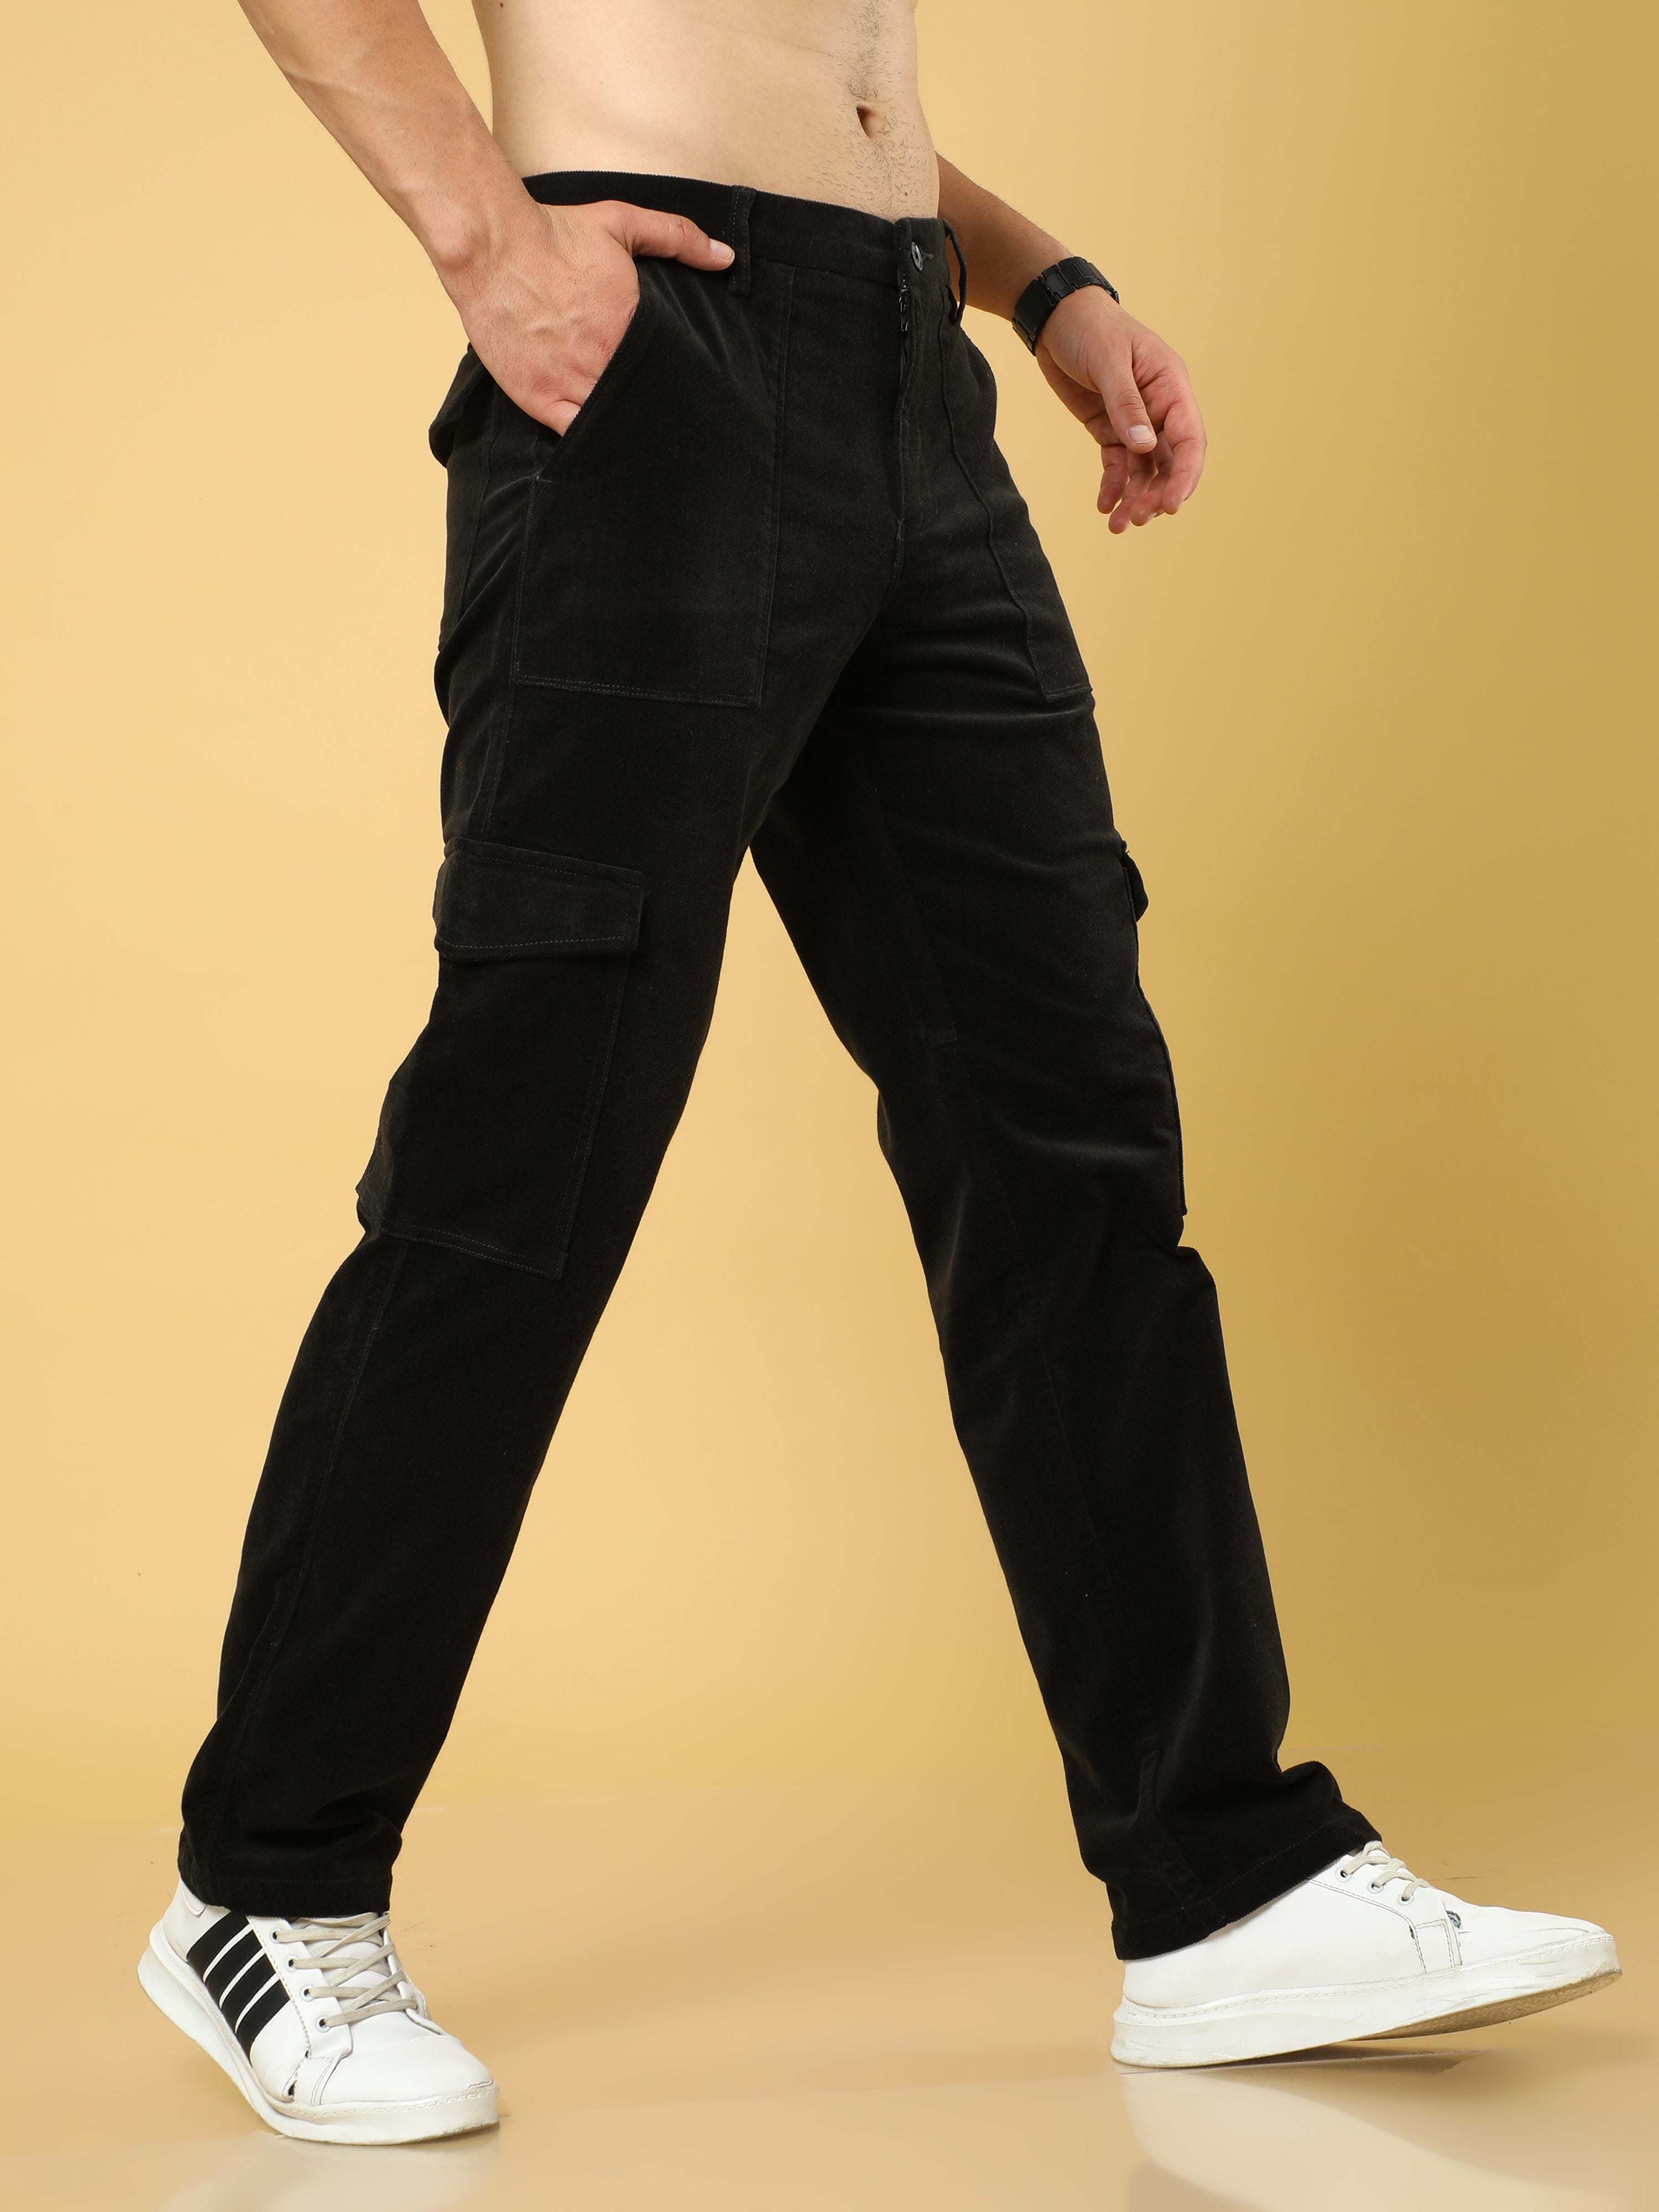 Quince Cotton Linen Twill Cargo Pant